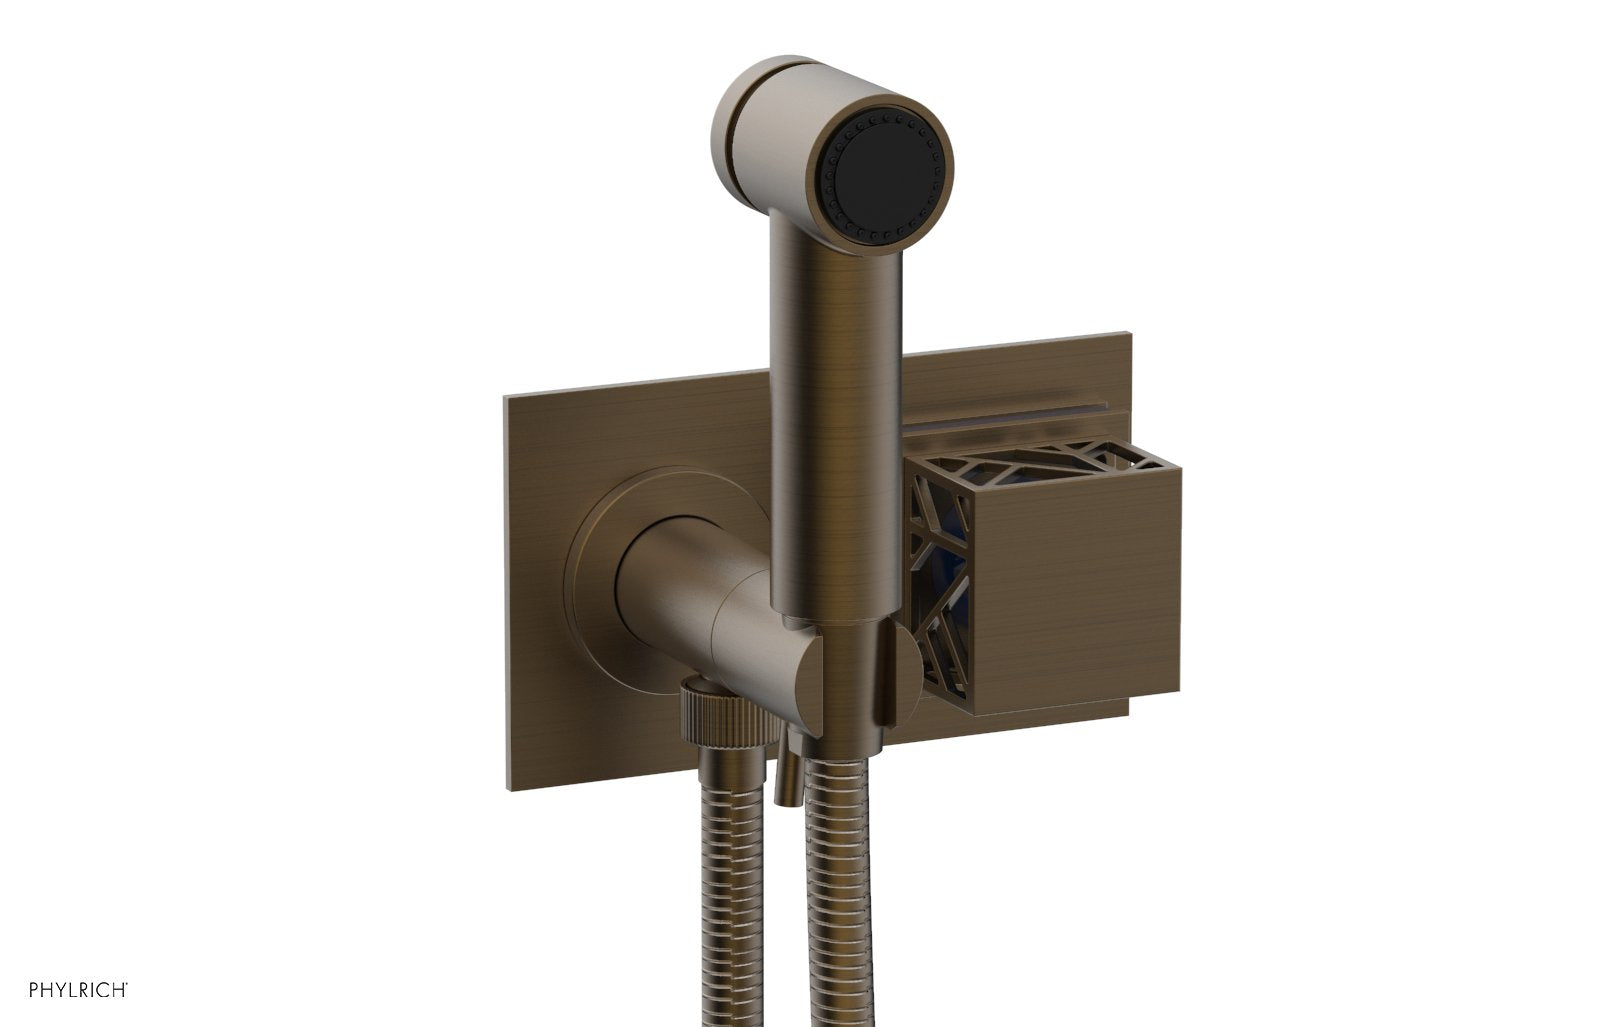 Phylrich JOLIE Wall Mounted Bidet, Square Handle with "Navy Blue" Accents